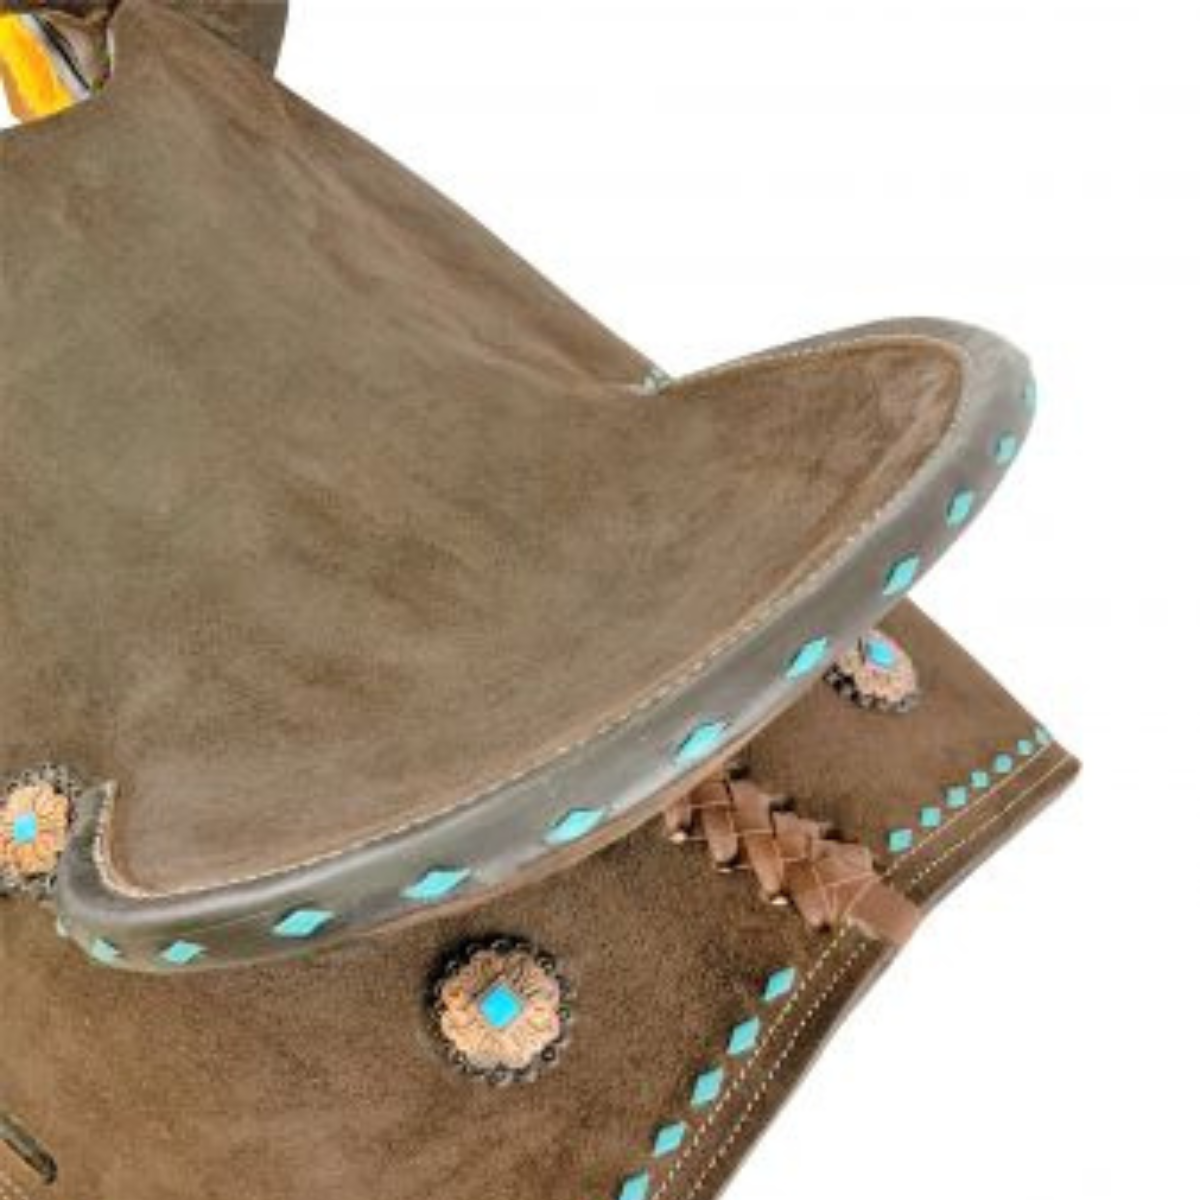 14", 15"  DOUBLE T   BARREL STYLE SADDLE WITH OILED ROUGH OUT LEATHER, TEAL BUCKSTITCH ACCENTS AND FLOWER CONCHOS - Double T Saddles